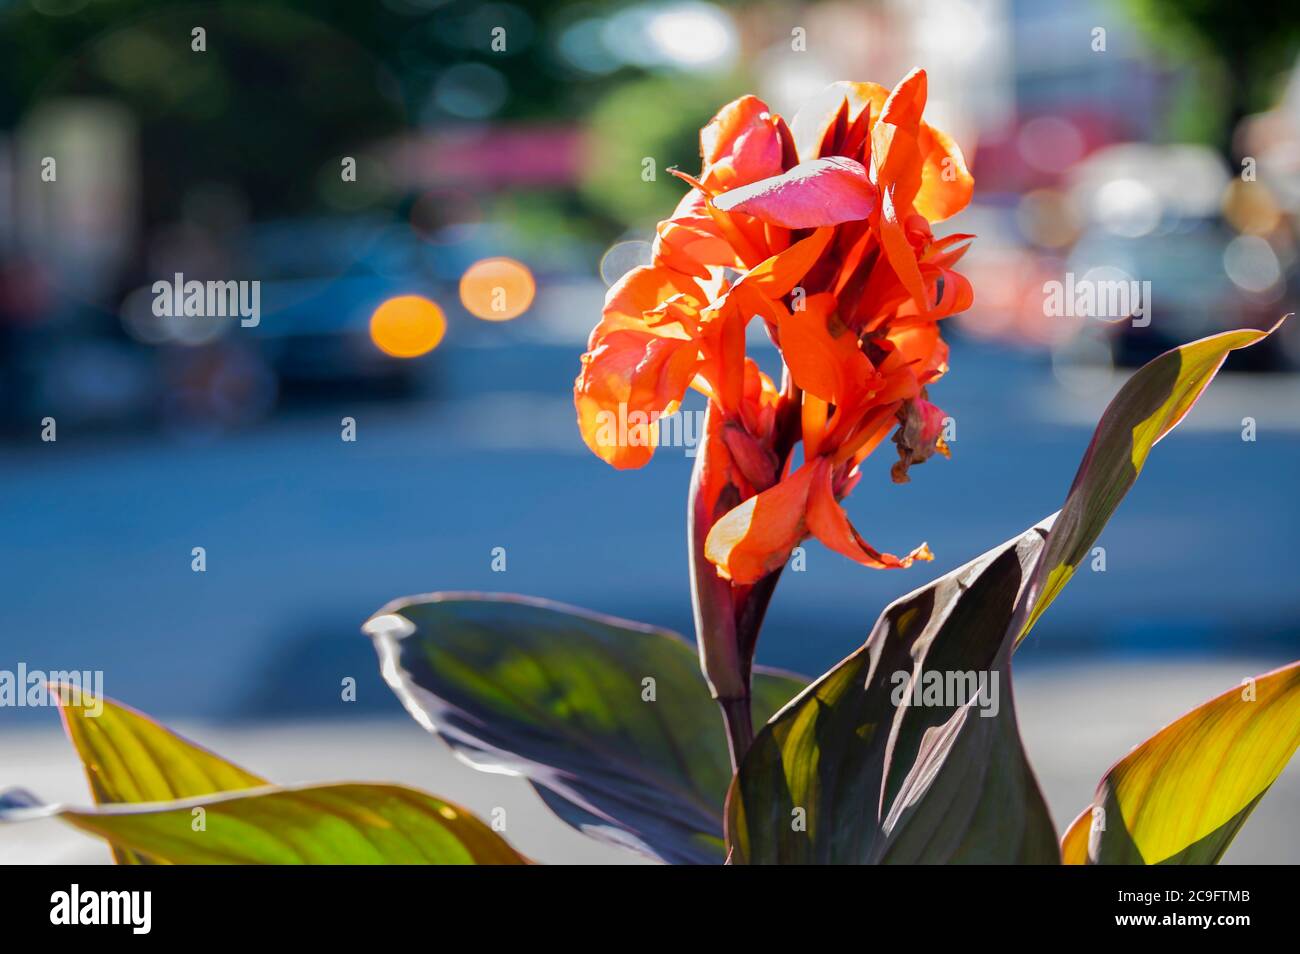 Orange flower with green leaves on busy city sidewalk. Stock Photo